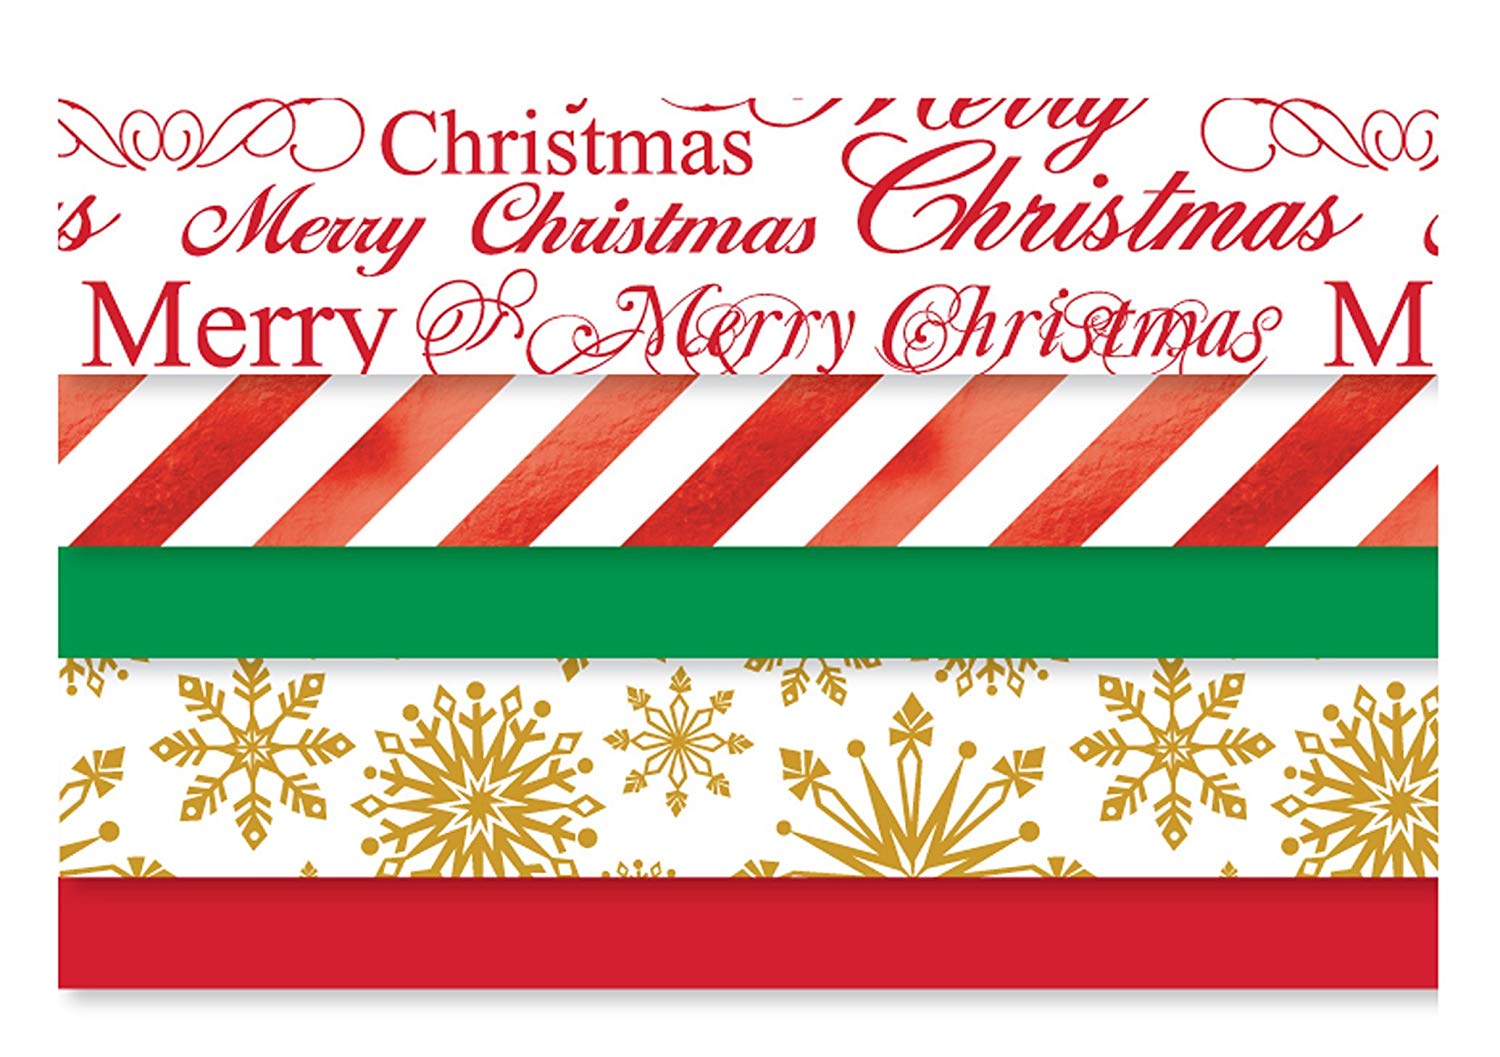 Printed Christmas Tissue Paper - 102 Sheet Pack with Foil Metallic Accents